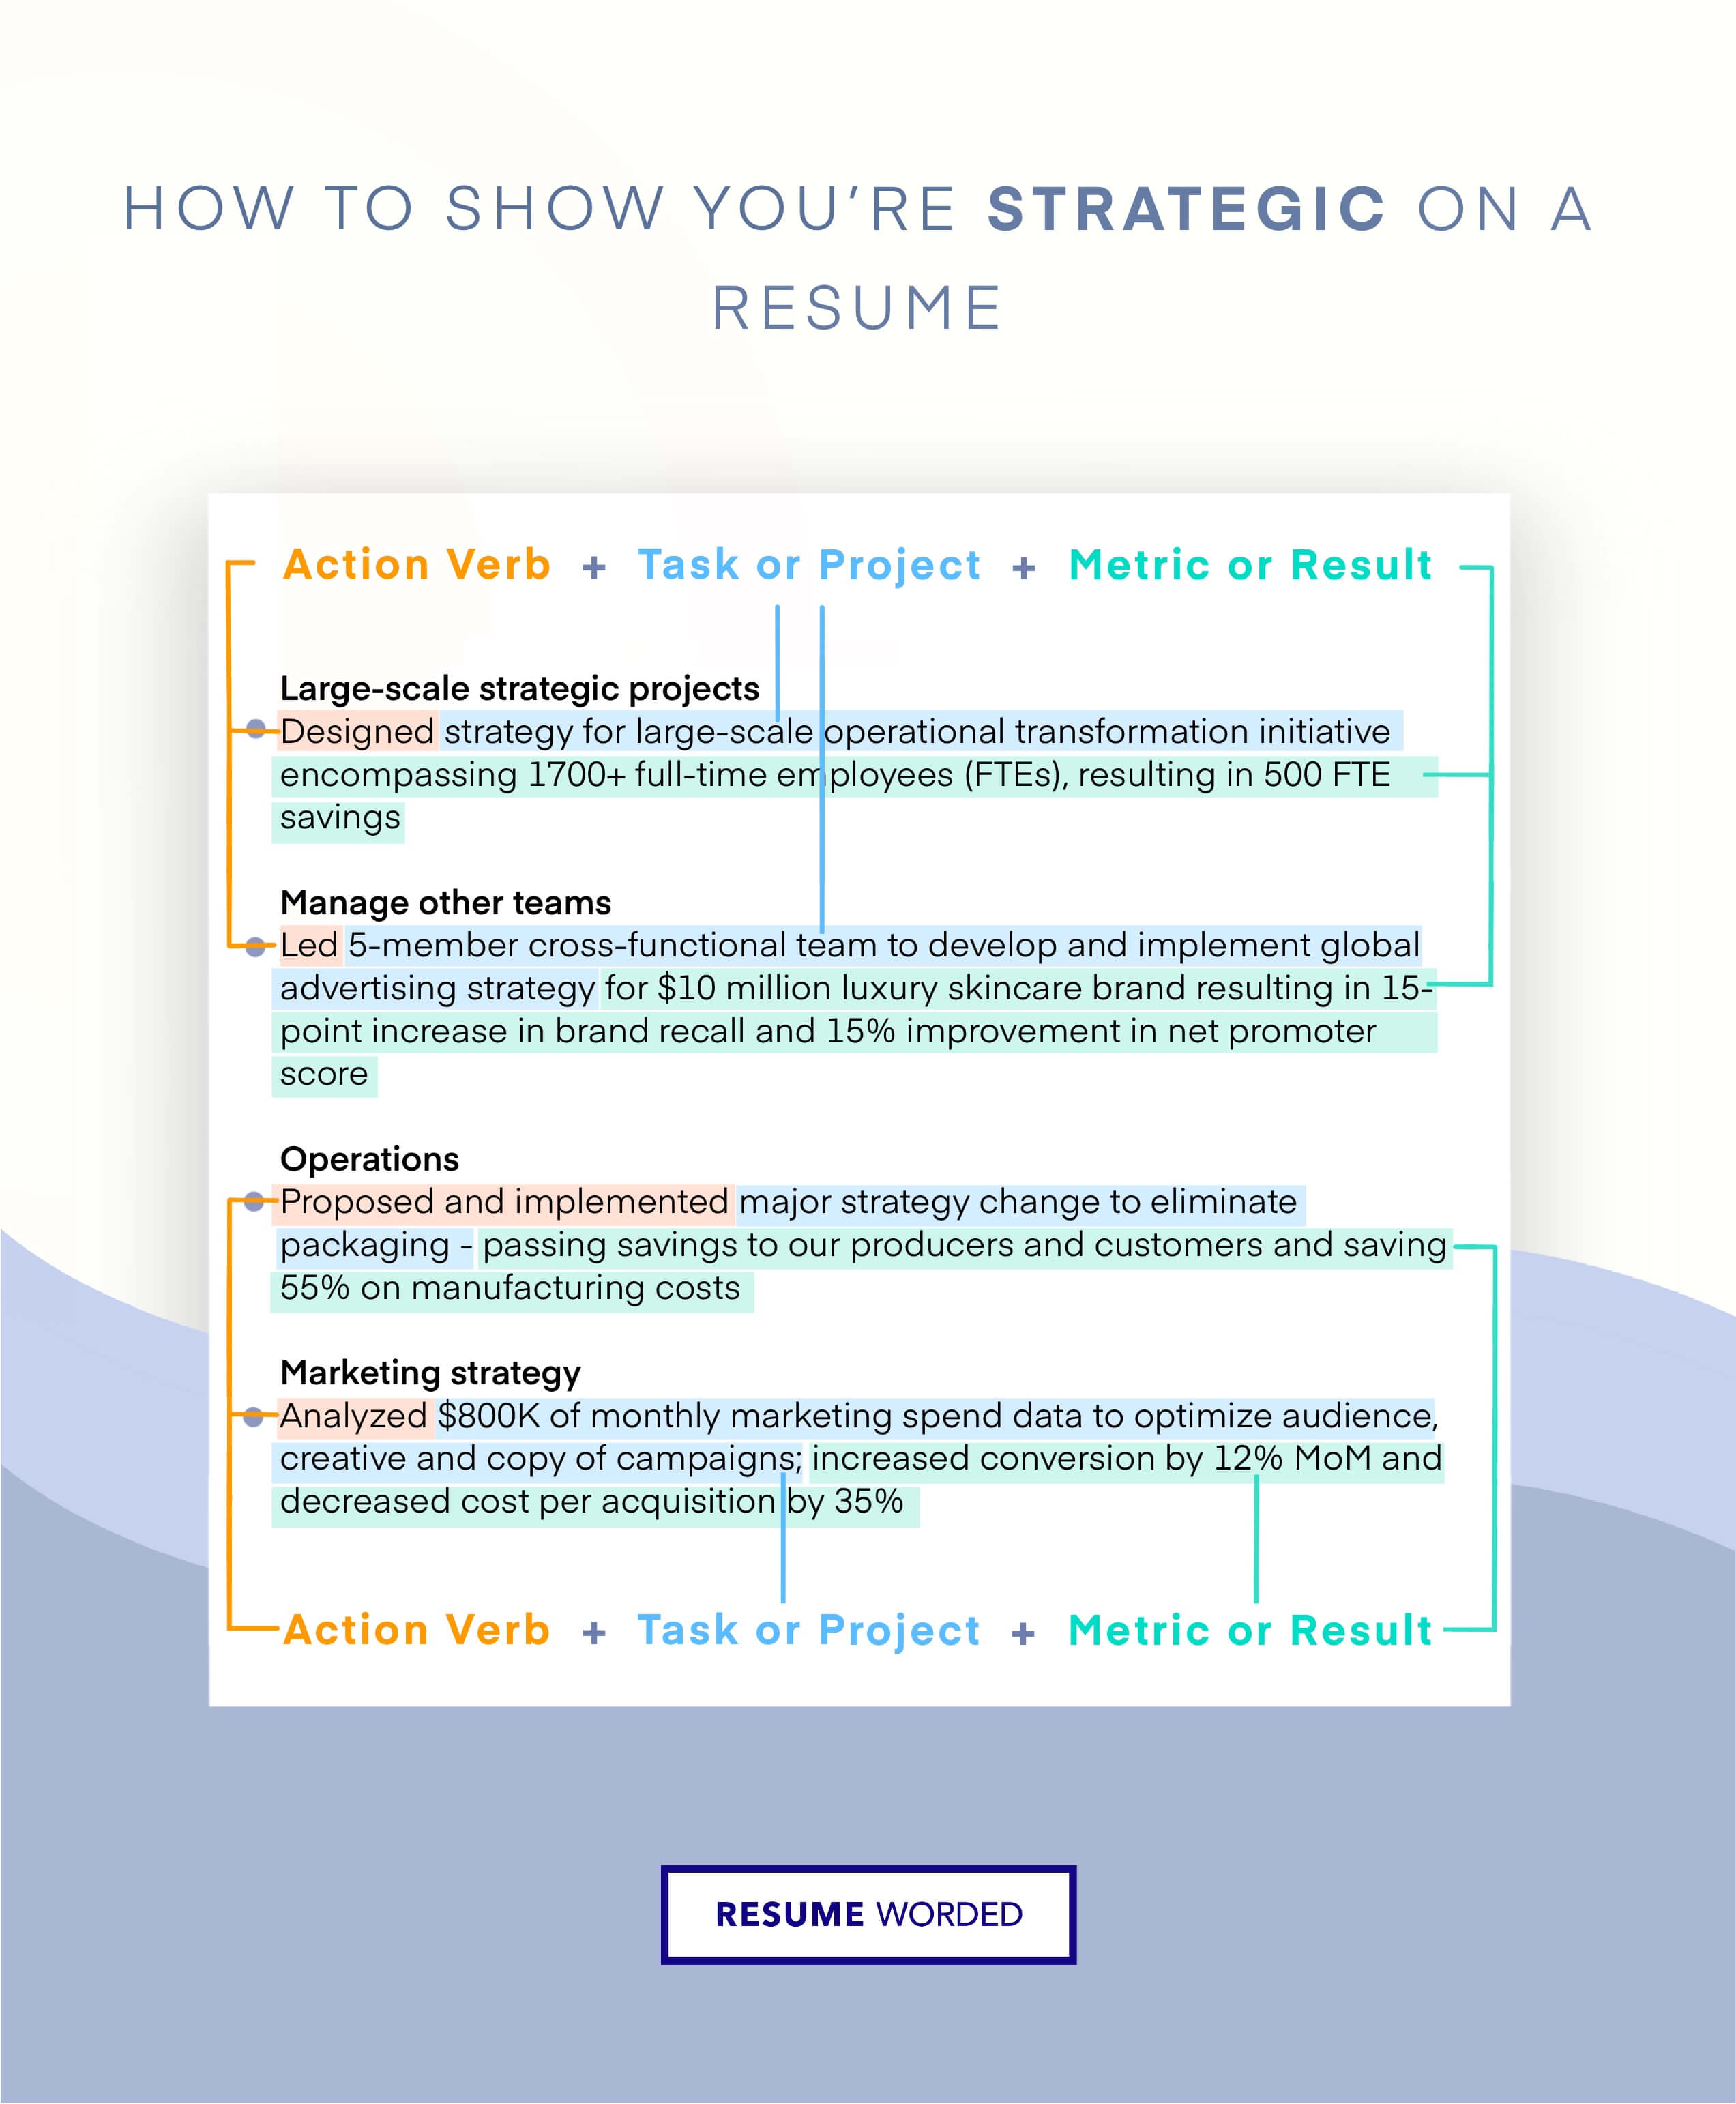 Showcase your leadership and strategic thinking - Information Security Manager Resume